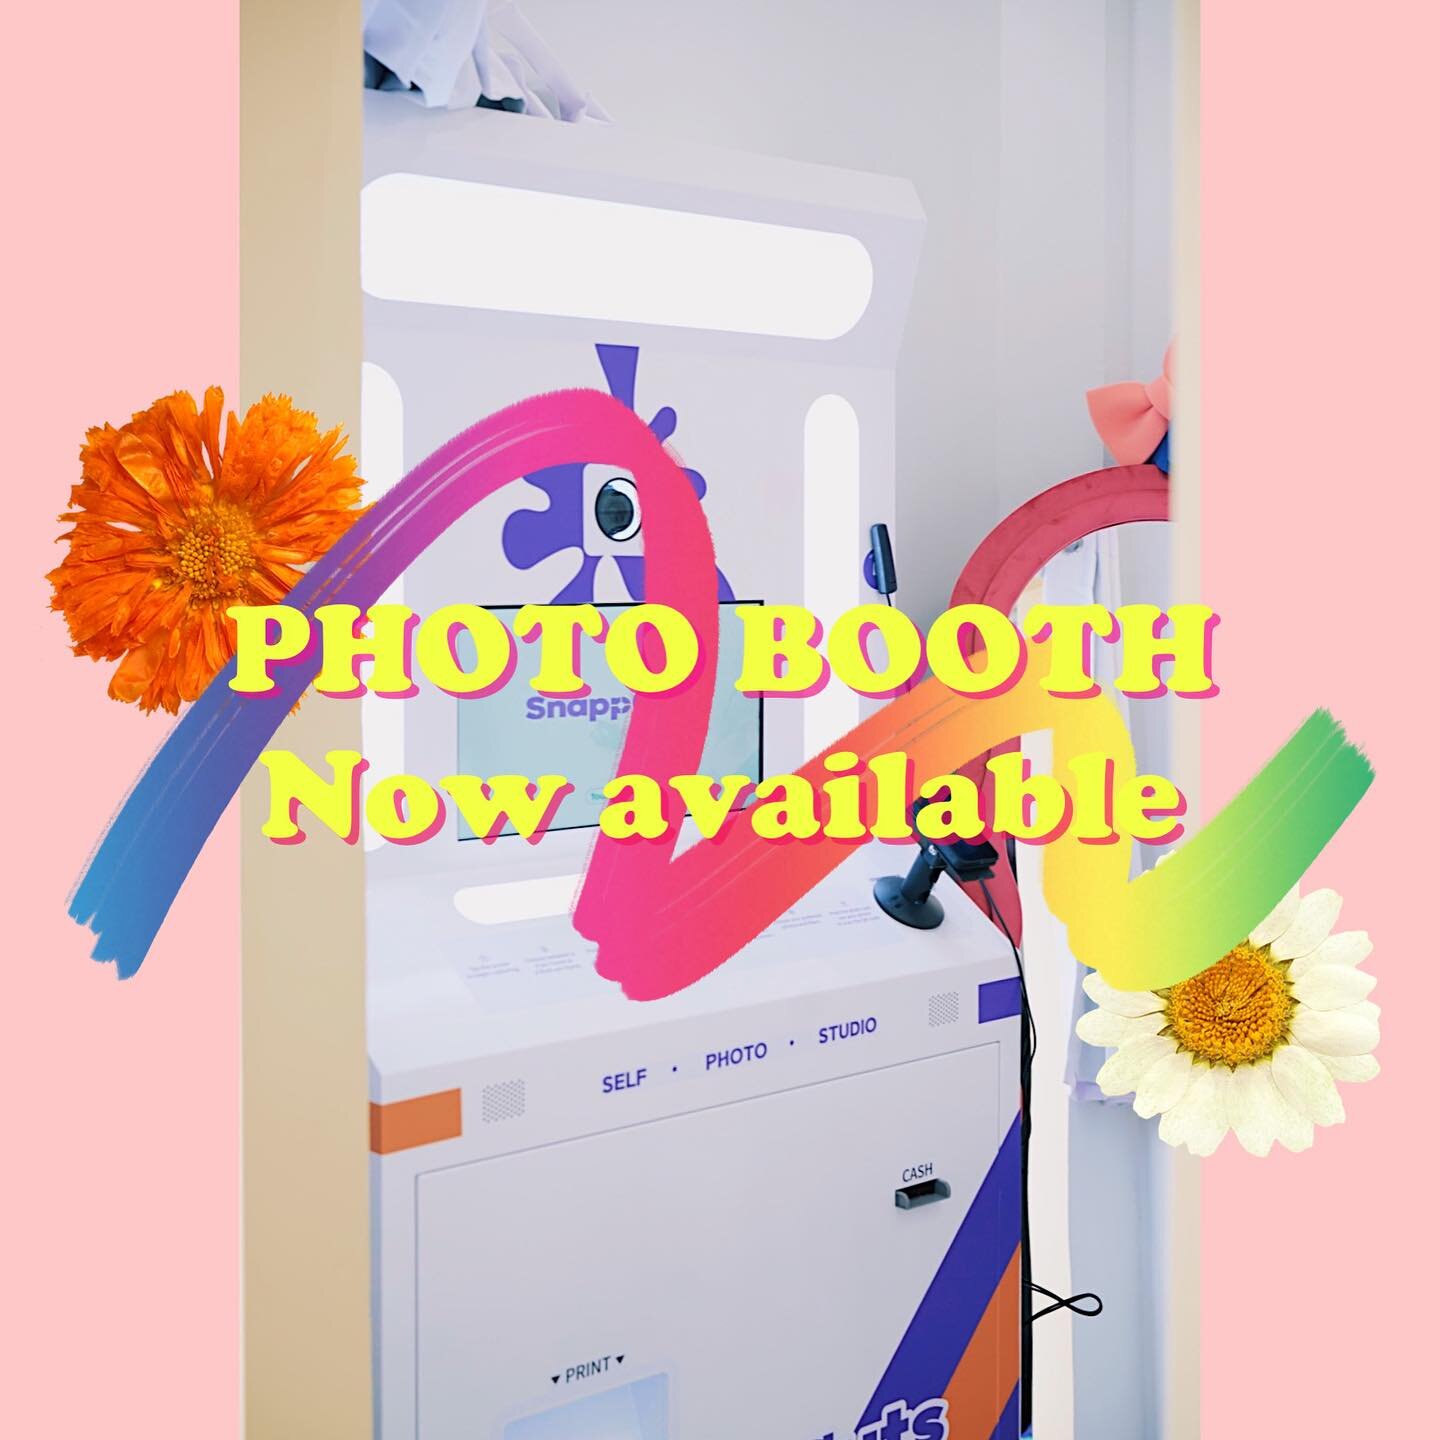 Say cheese and strike a pose! 📸 Our new photo booth is now available. Come and check it out! #PhotoBoothFun